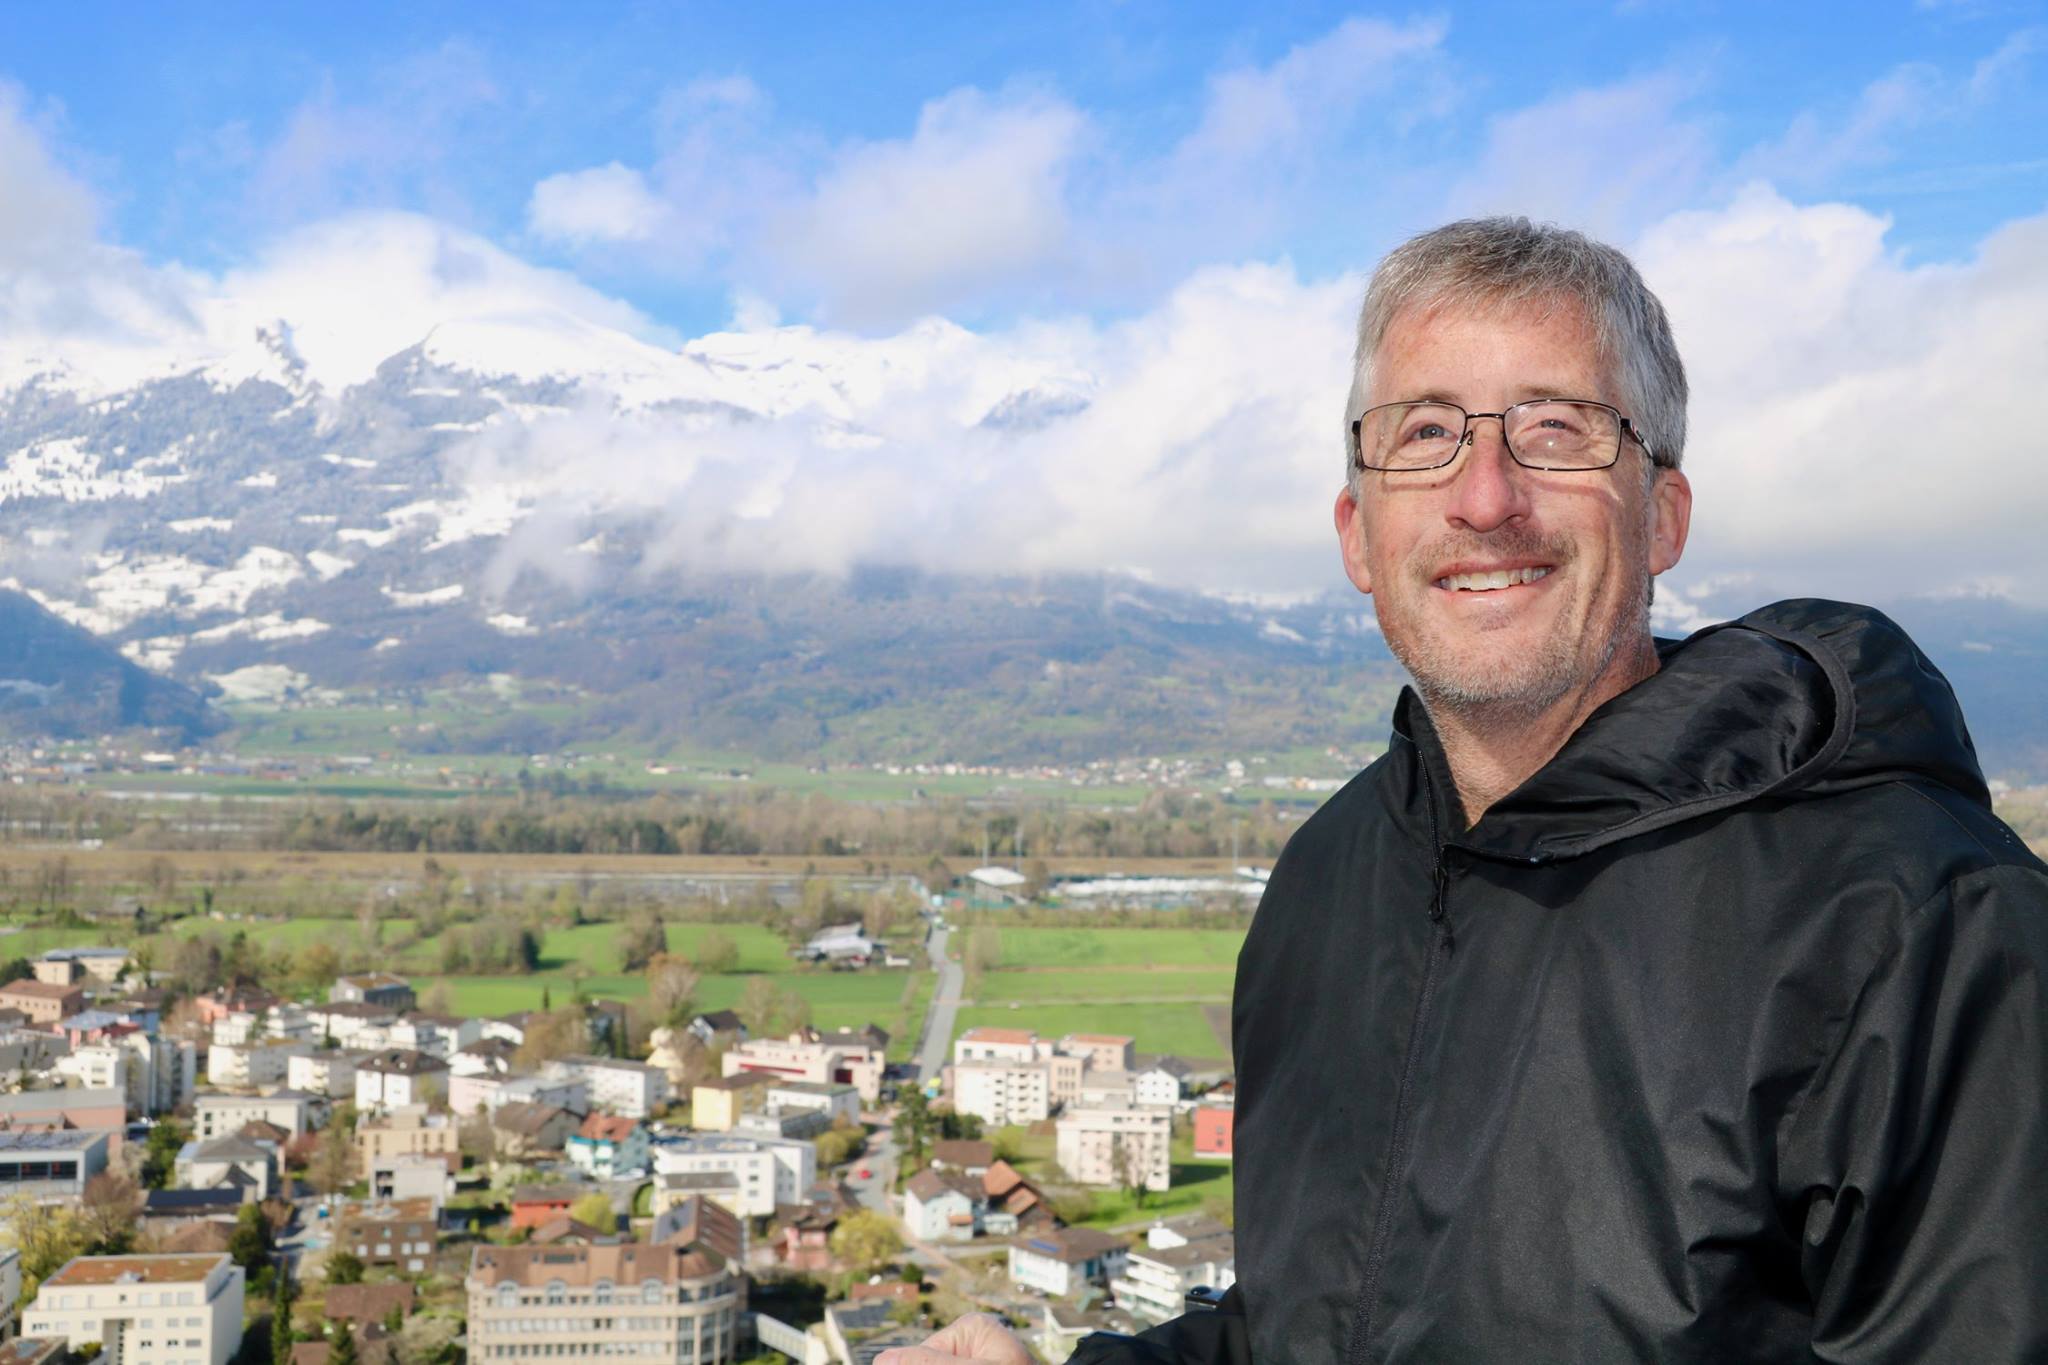 Dave Brill smiling with European Alps in background